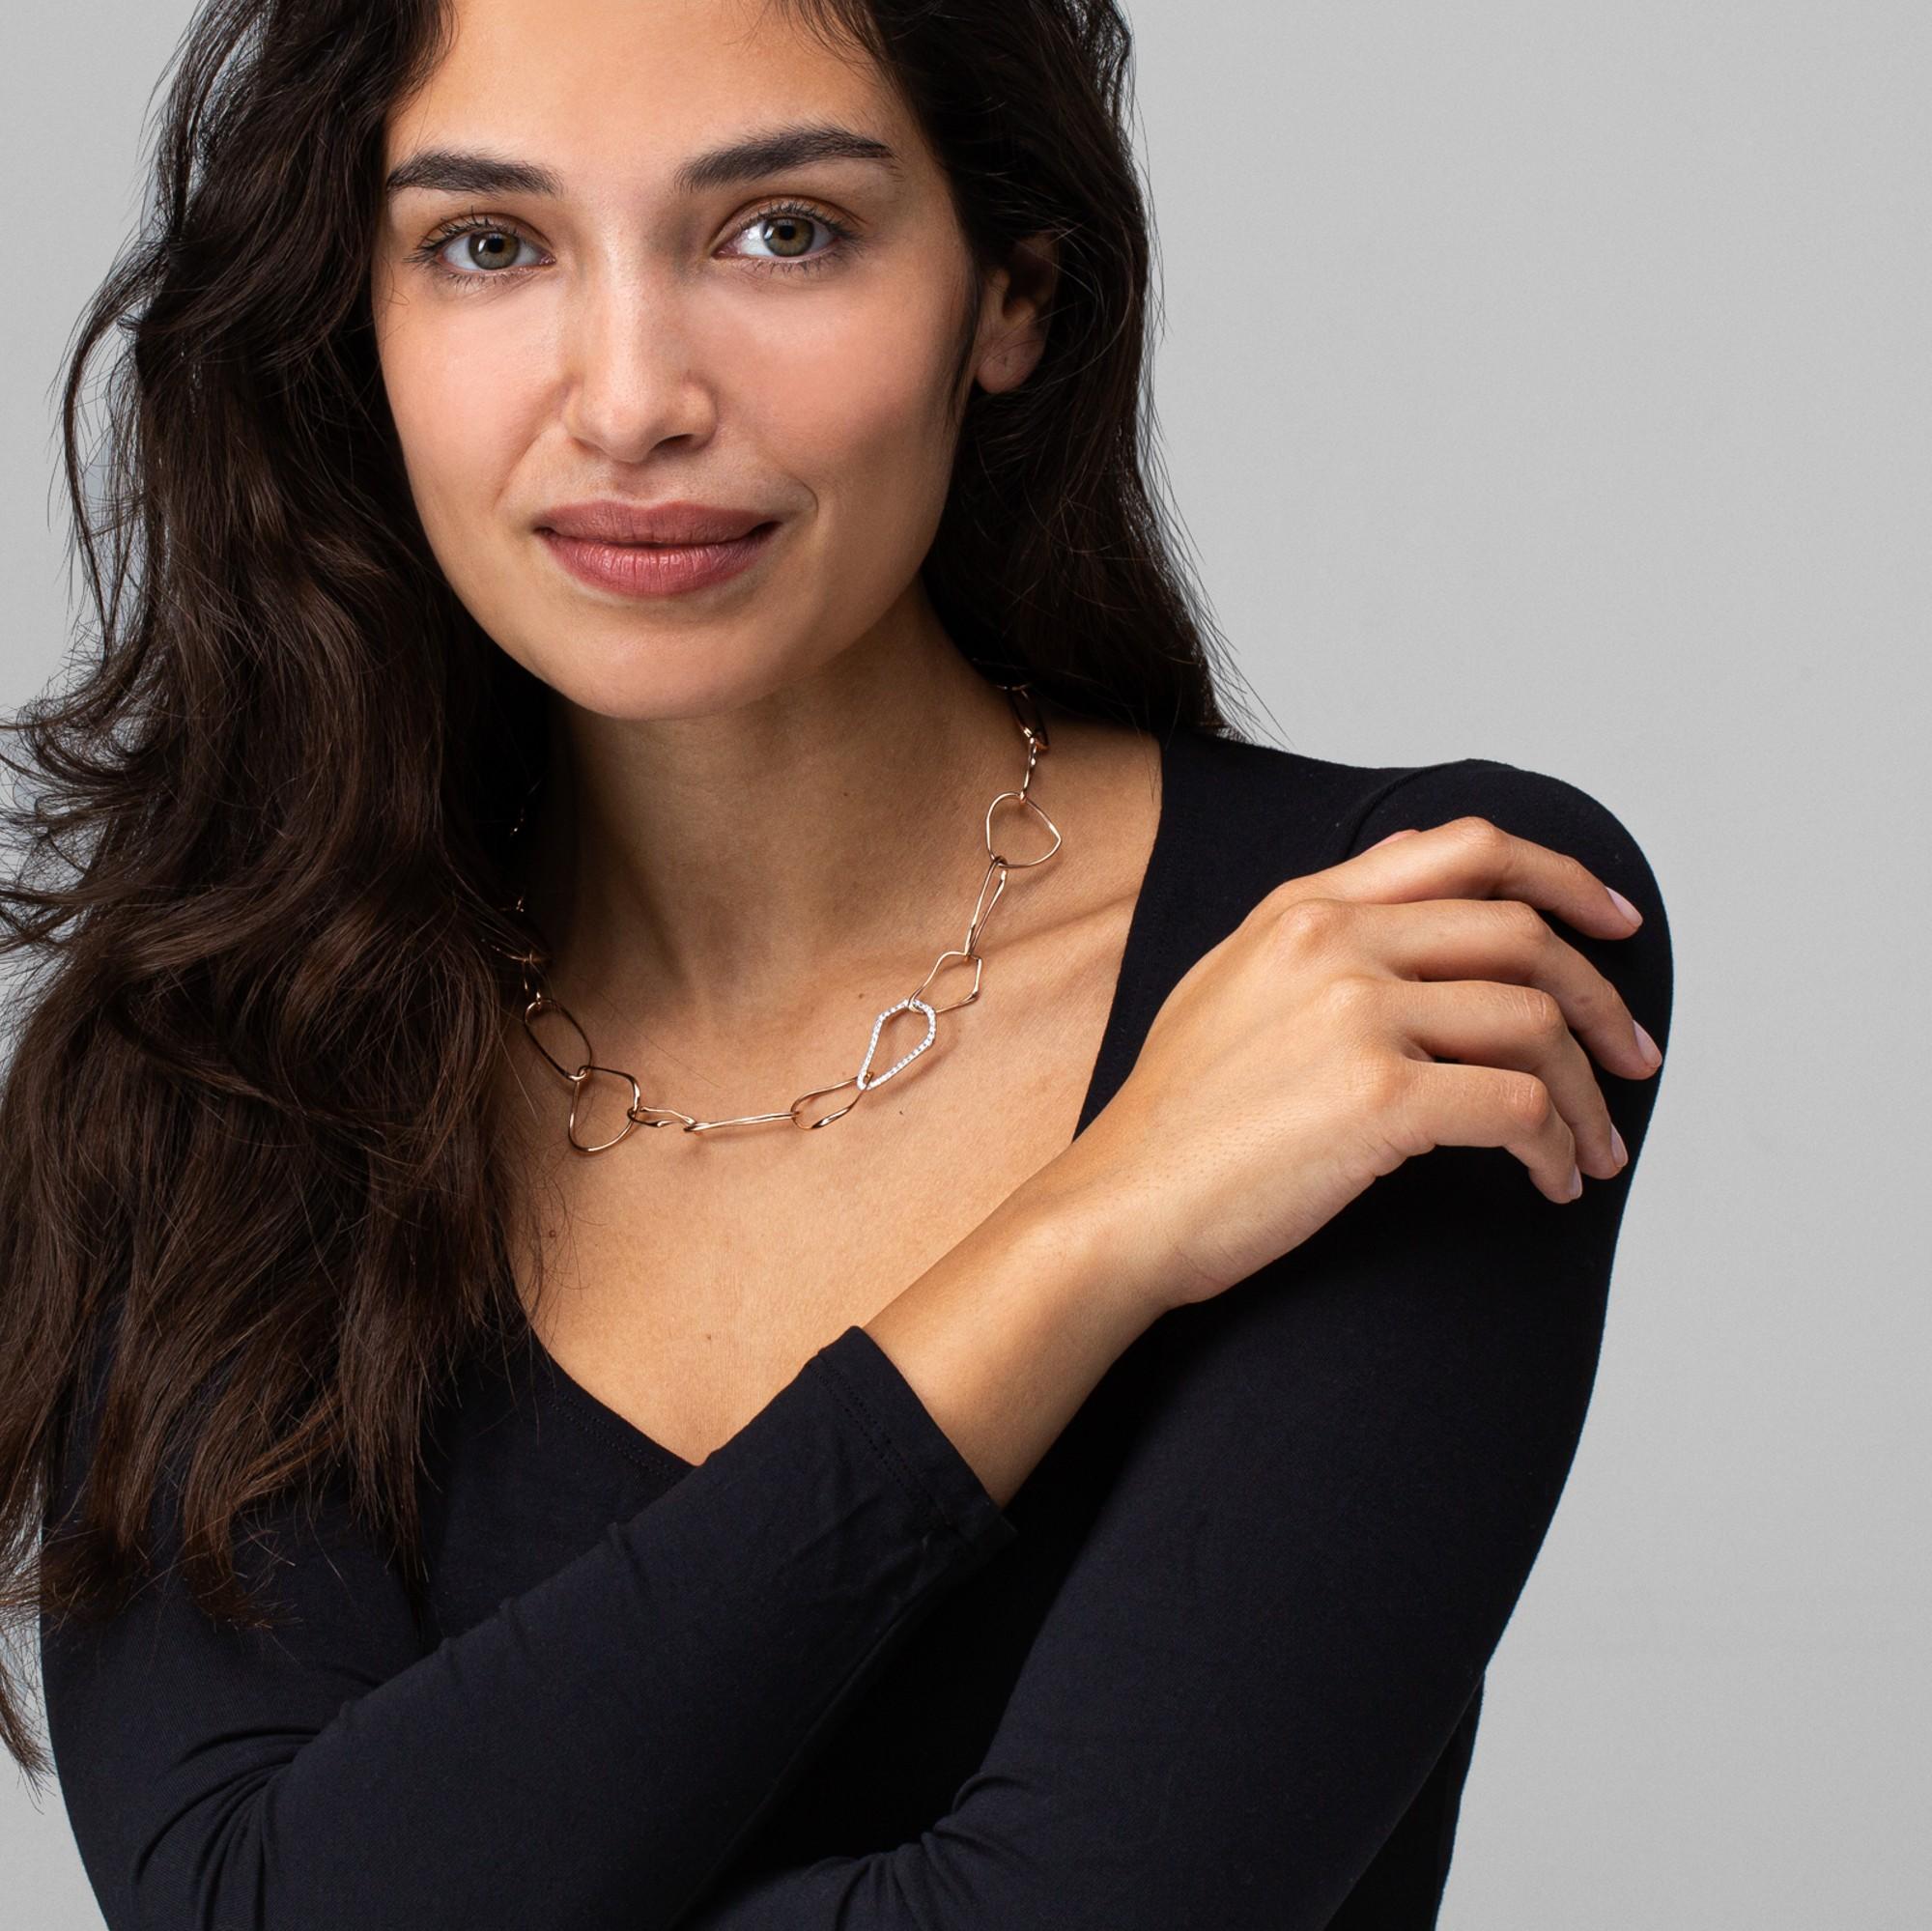 Alex Jona design collection, hand crafted in Italy, 18 karat rose gold irregular link necklace. One link is encrusted with white diamonds for a total weight of 0.67 carats.
Alex Jona jewels stand out, not only for their special design and for the